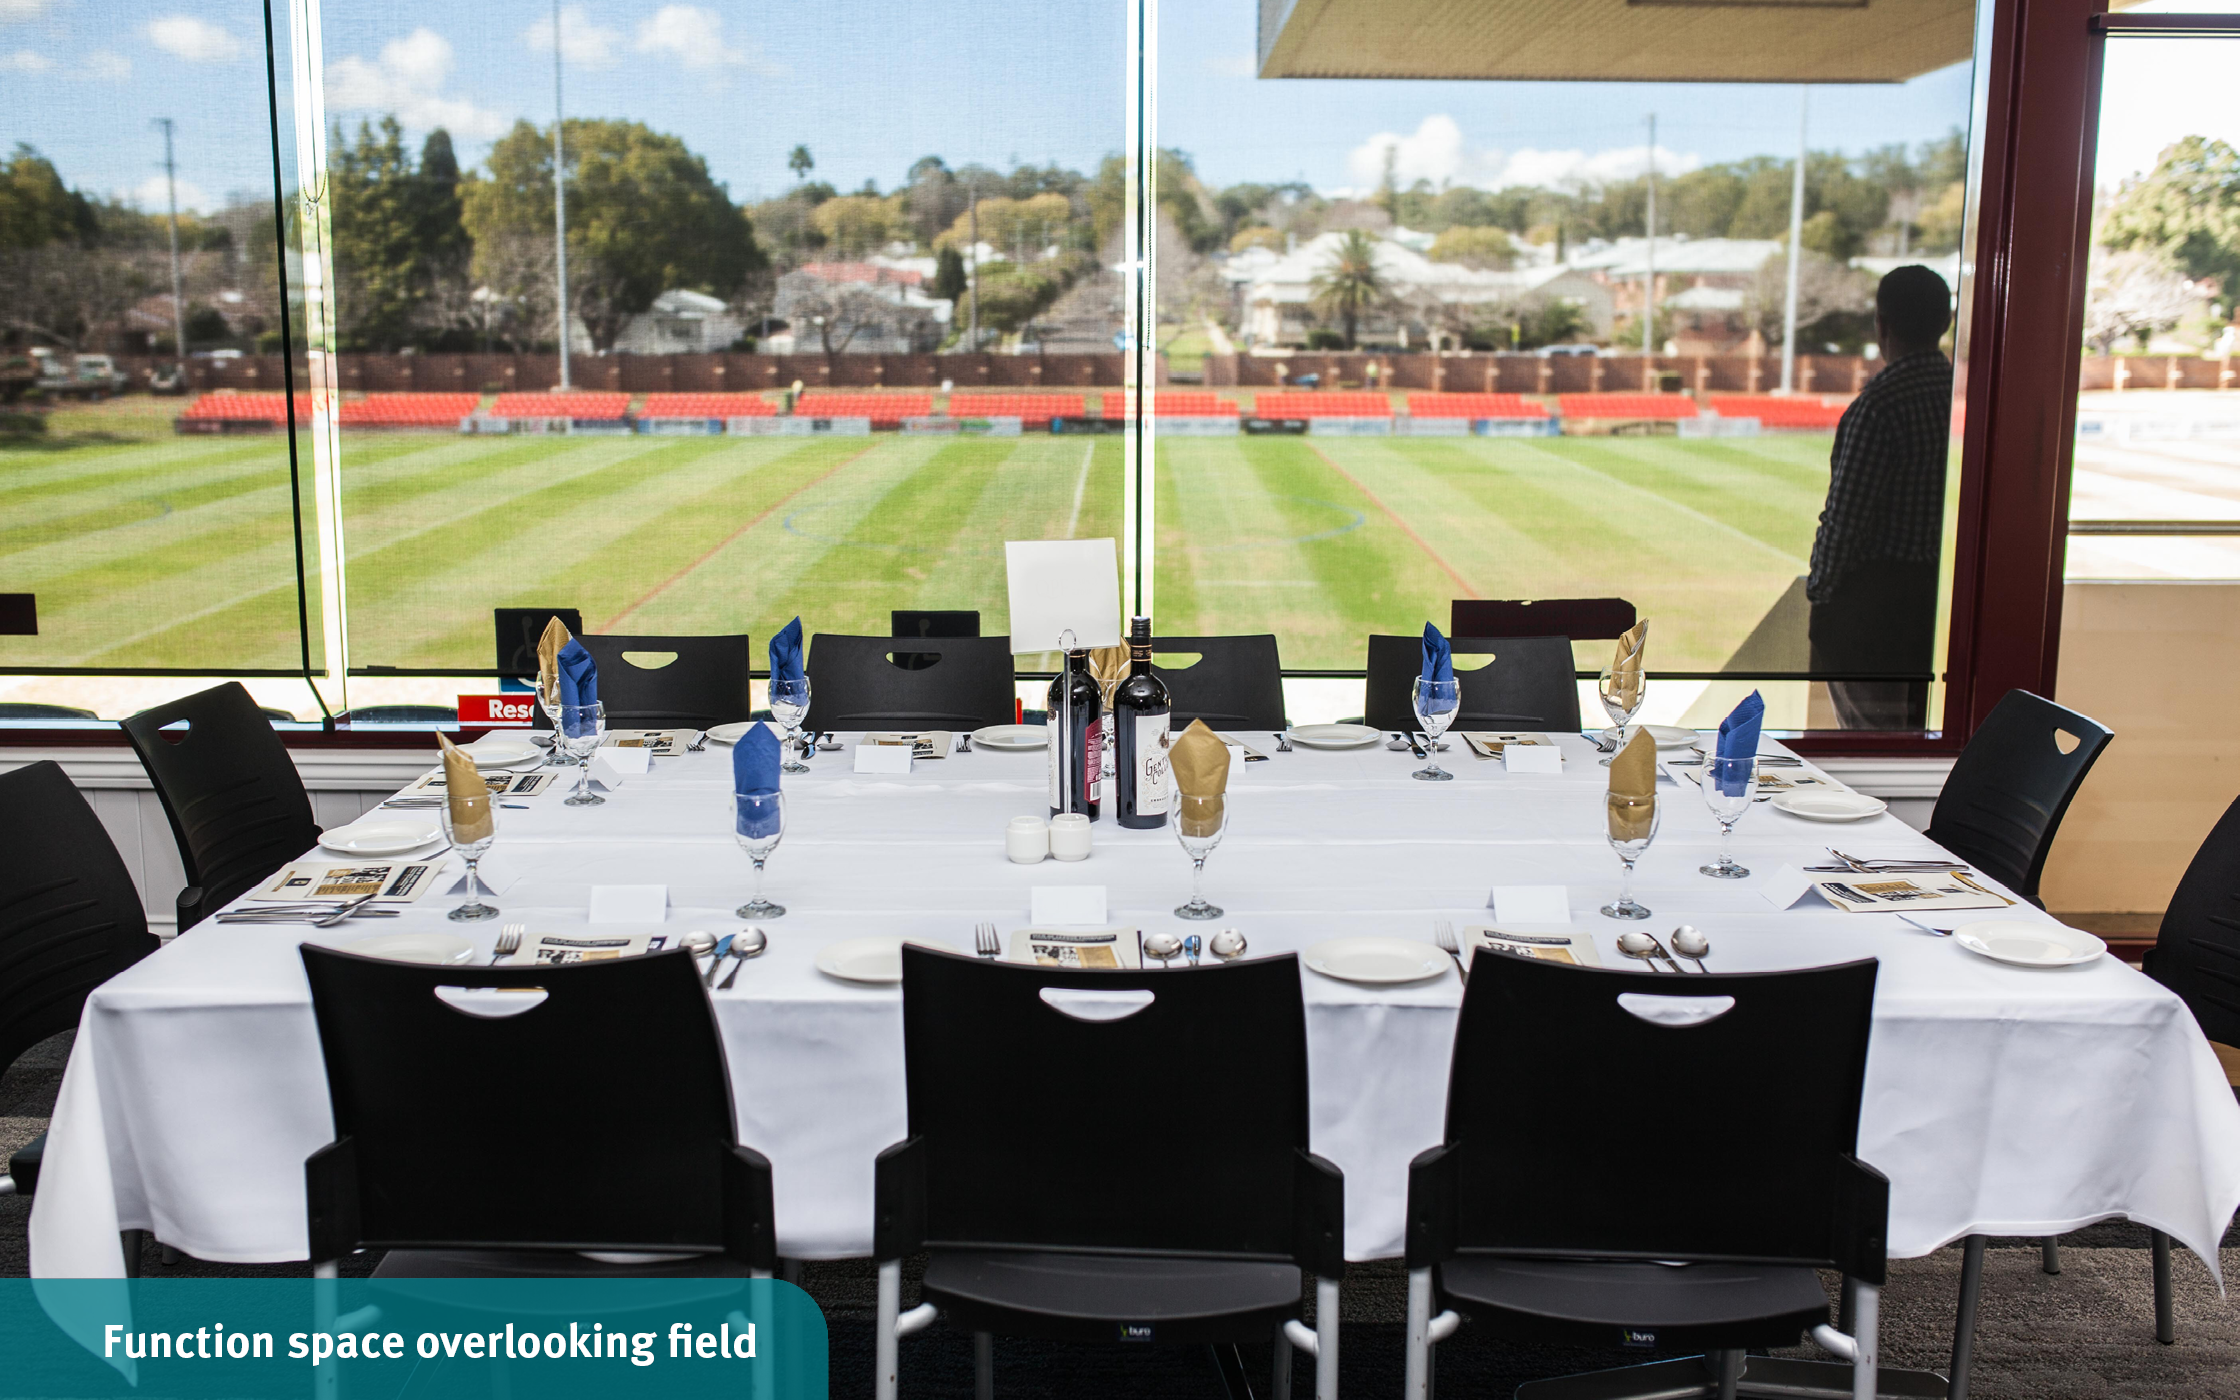 Elegant dining table set with dinnerware and wine glasses overlooking the green outdoor field from the function room at the Toowoomba Sports Grounds.